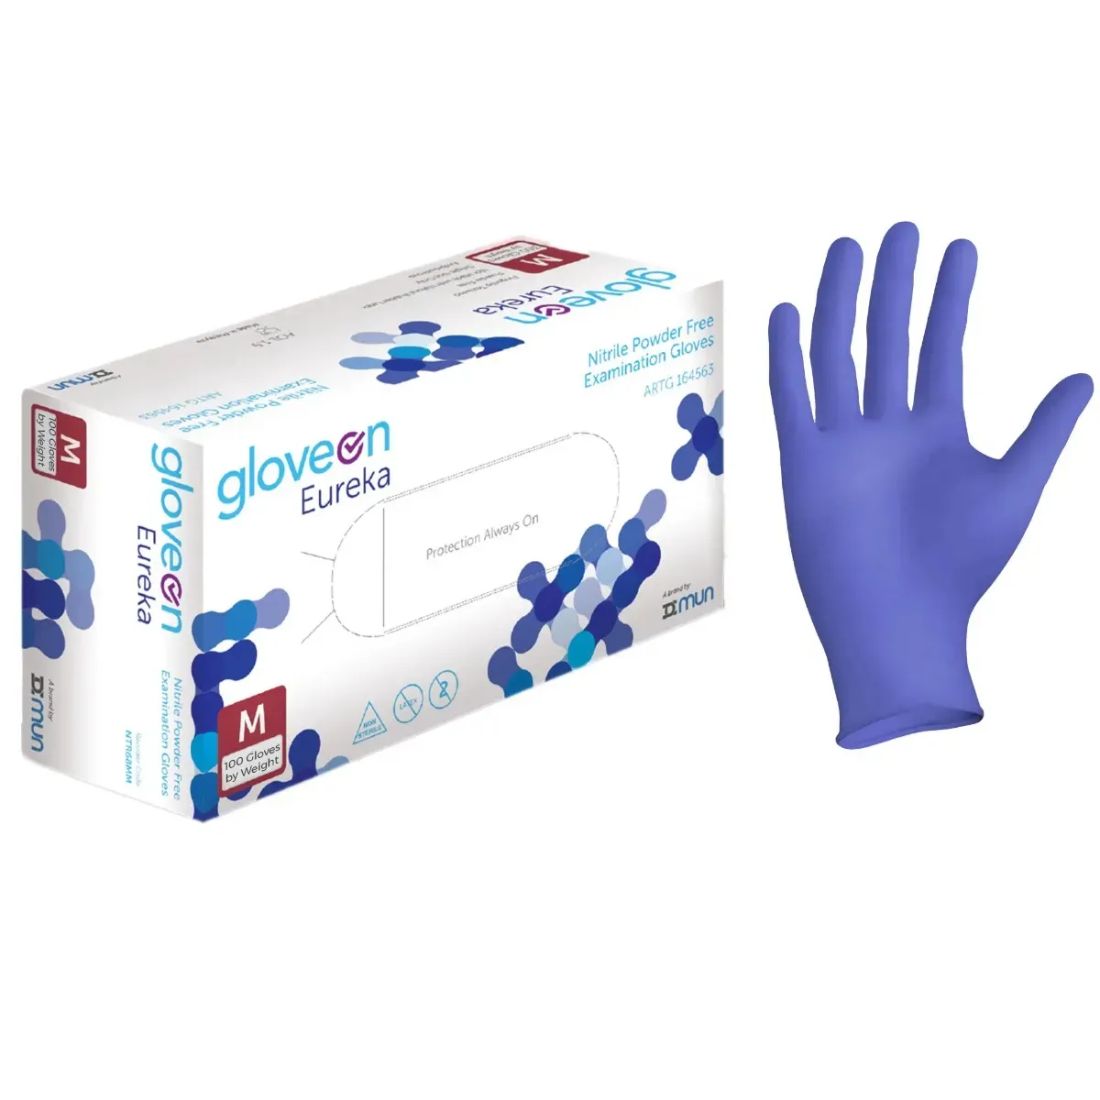 Nitrile Powdered Free Examination Gloves - Pack of 100 Nos